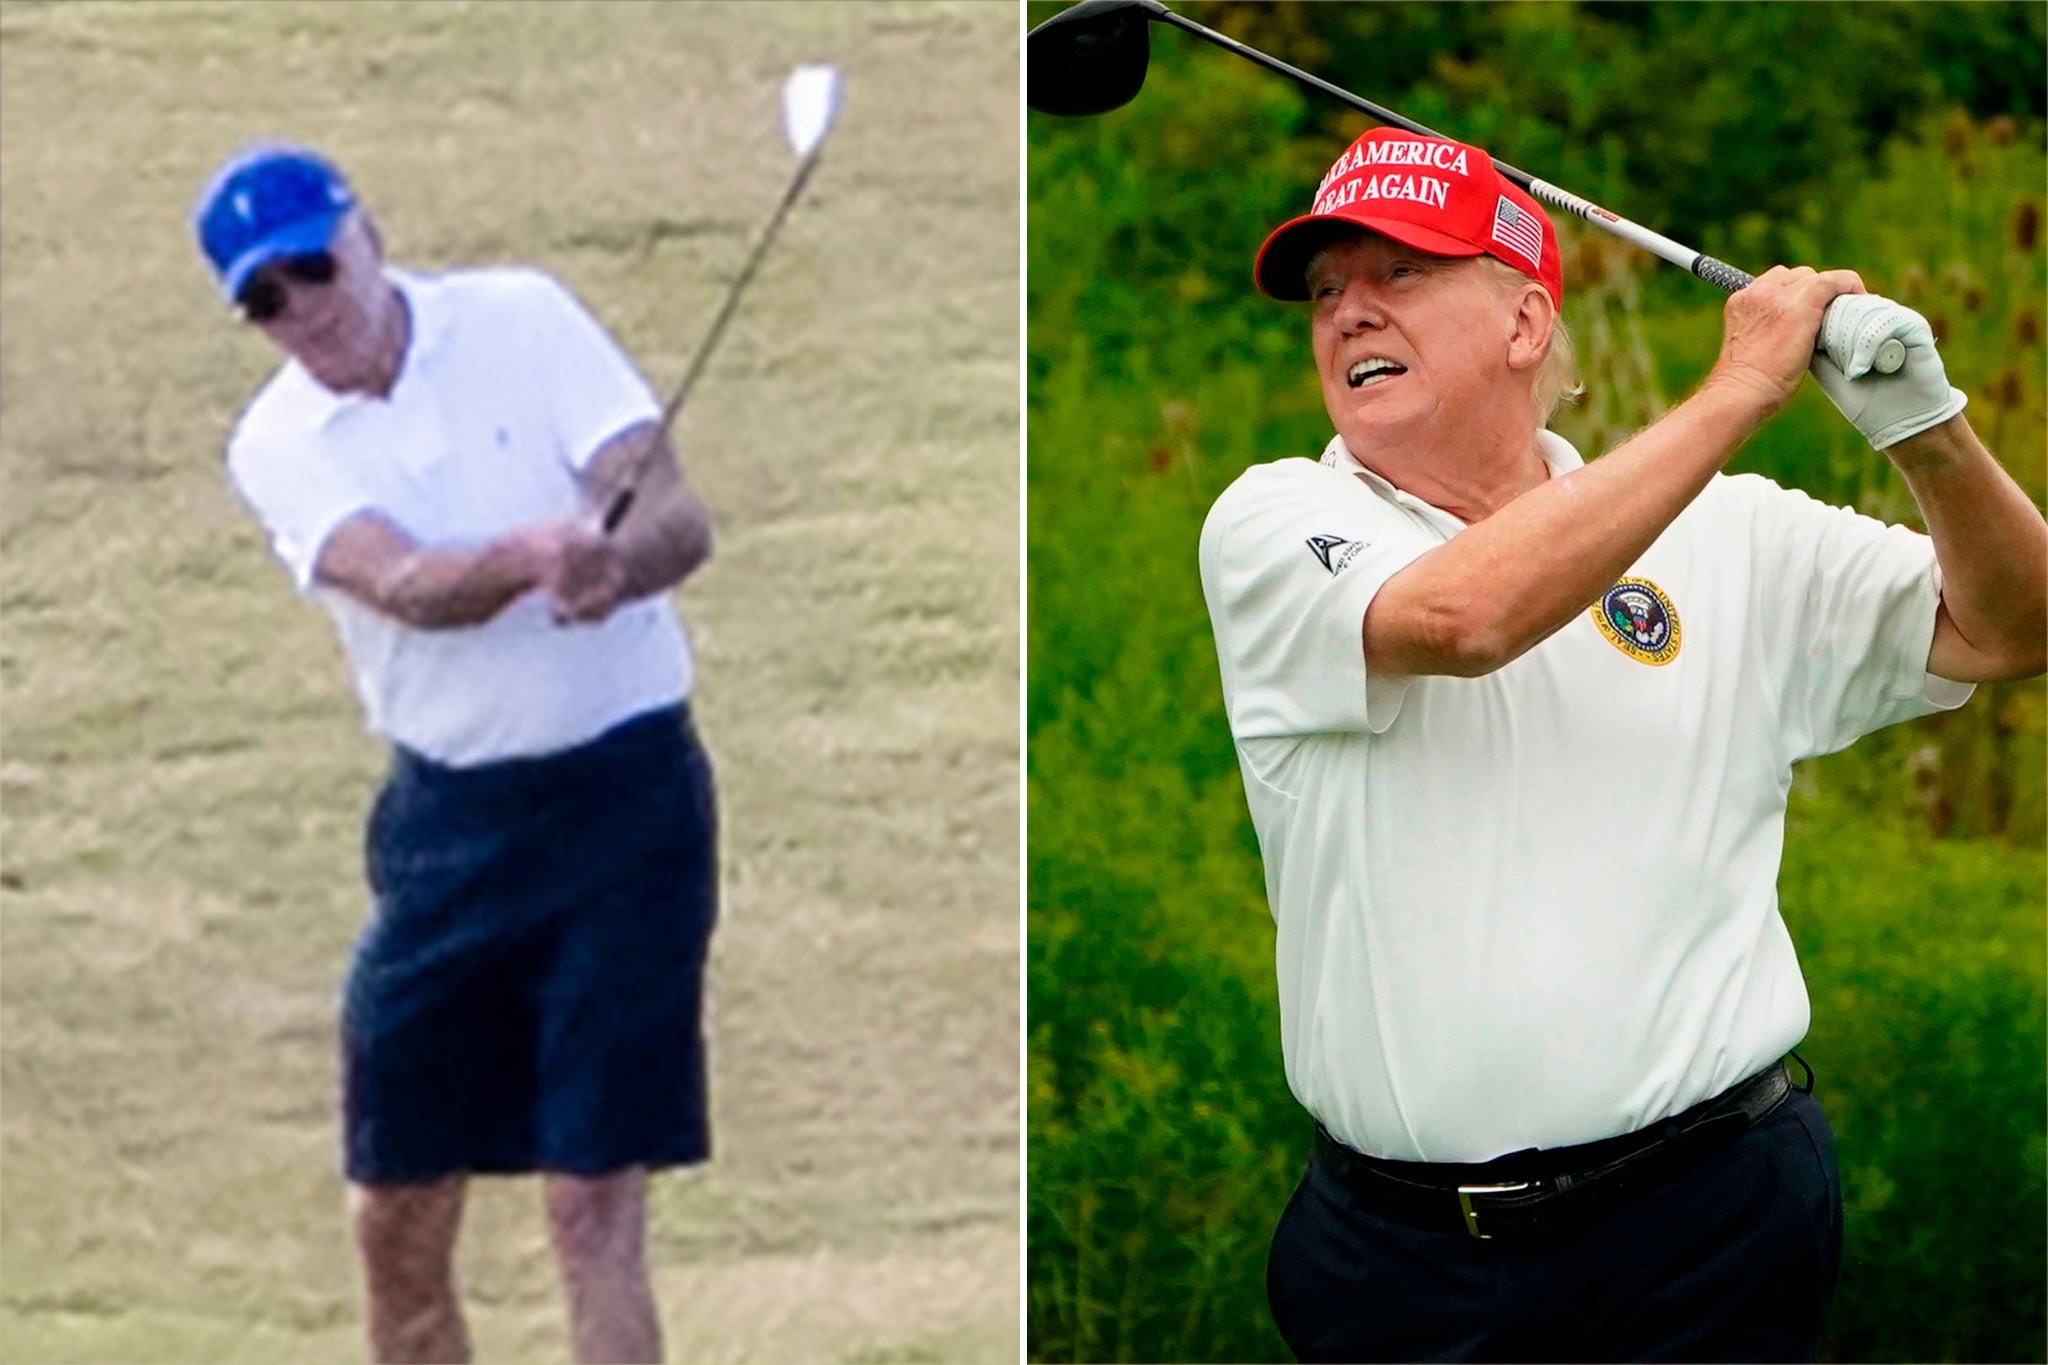 golf course, joe biden, donald trump, us election 2024, biden and trump clashed over golf at debate – but who really is the best golfer?